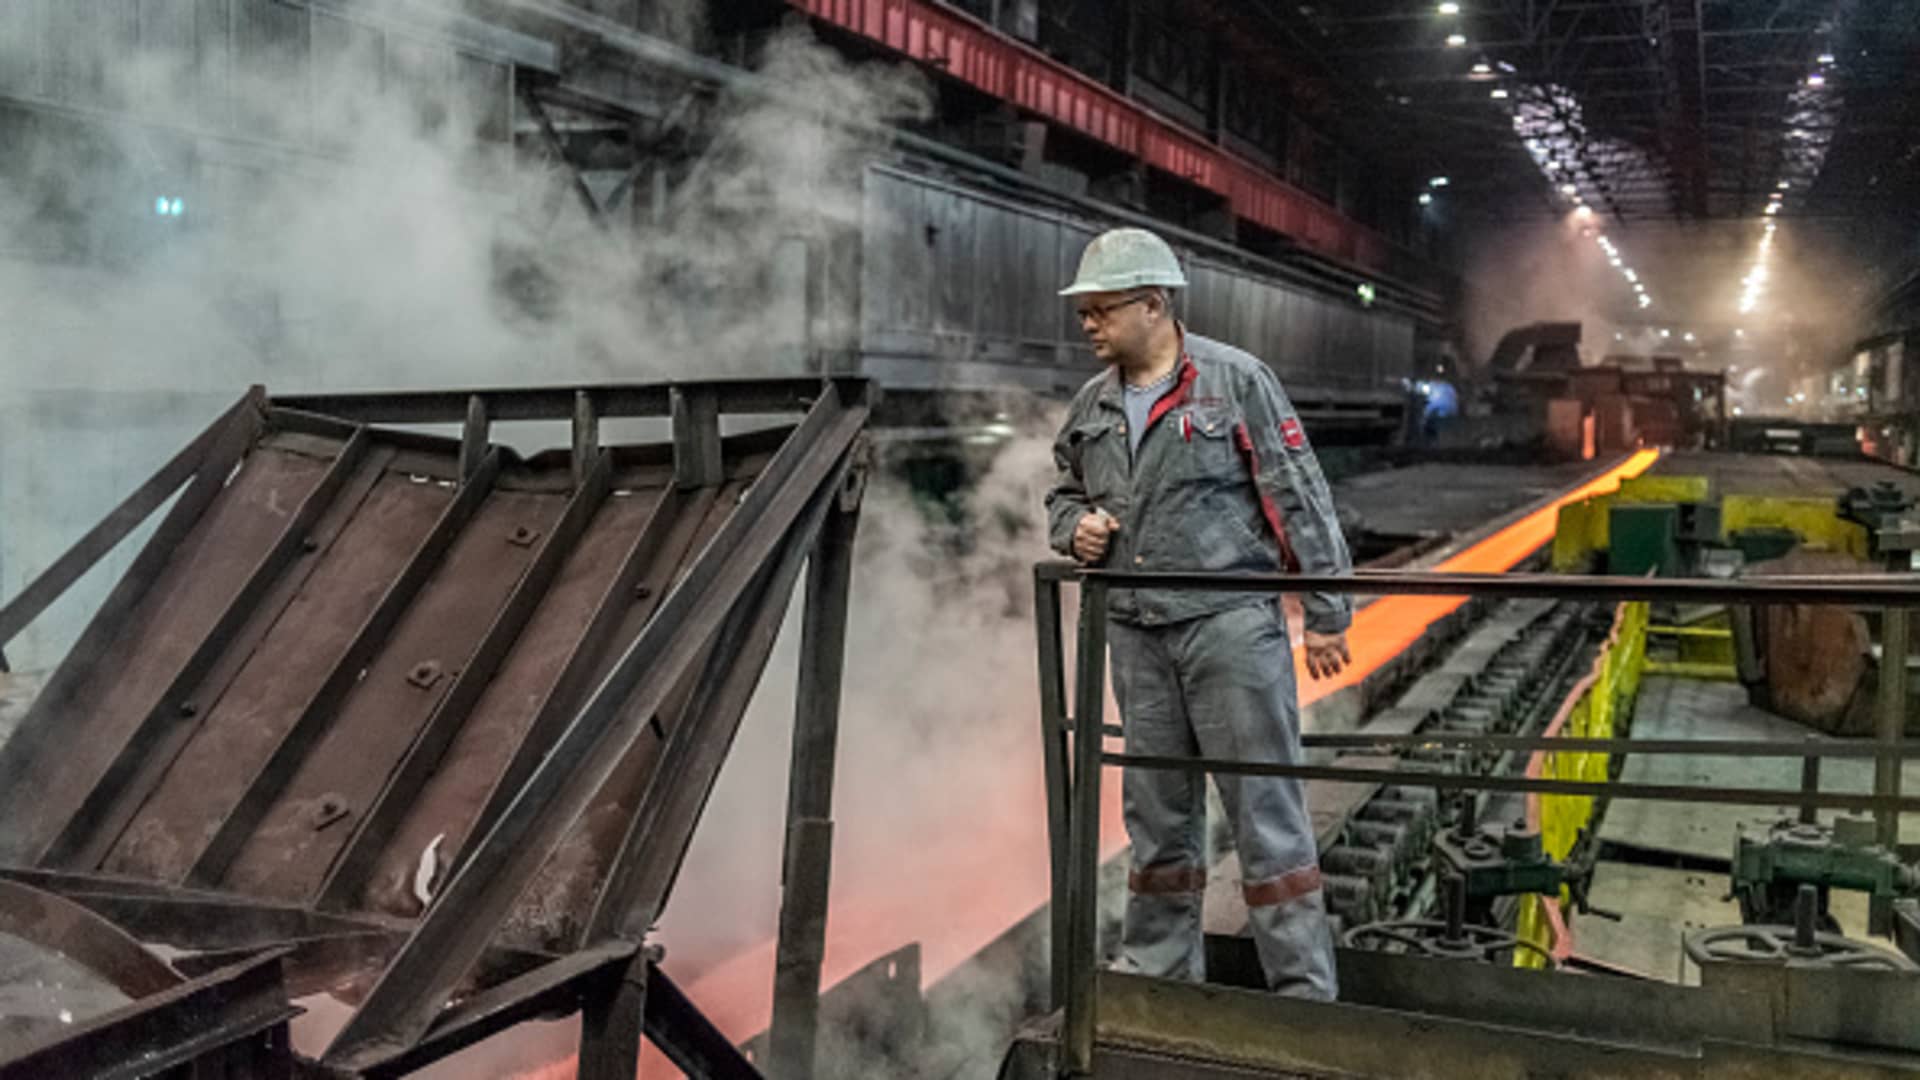 Working process at the Zaporizhstal steel plant, owned and operated by Metinvest, the largest private company of Ukraine, Zaporizhia, Ukraine, on August 2, 2019.